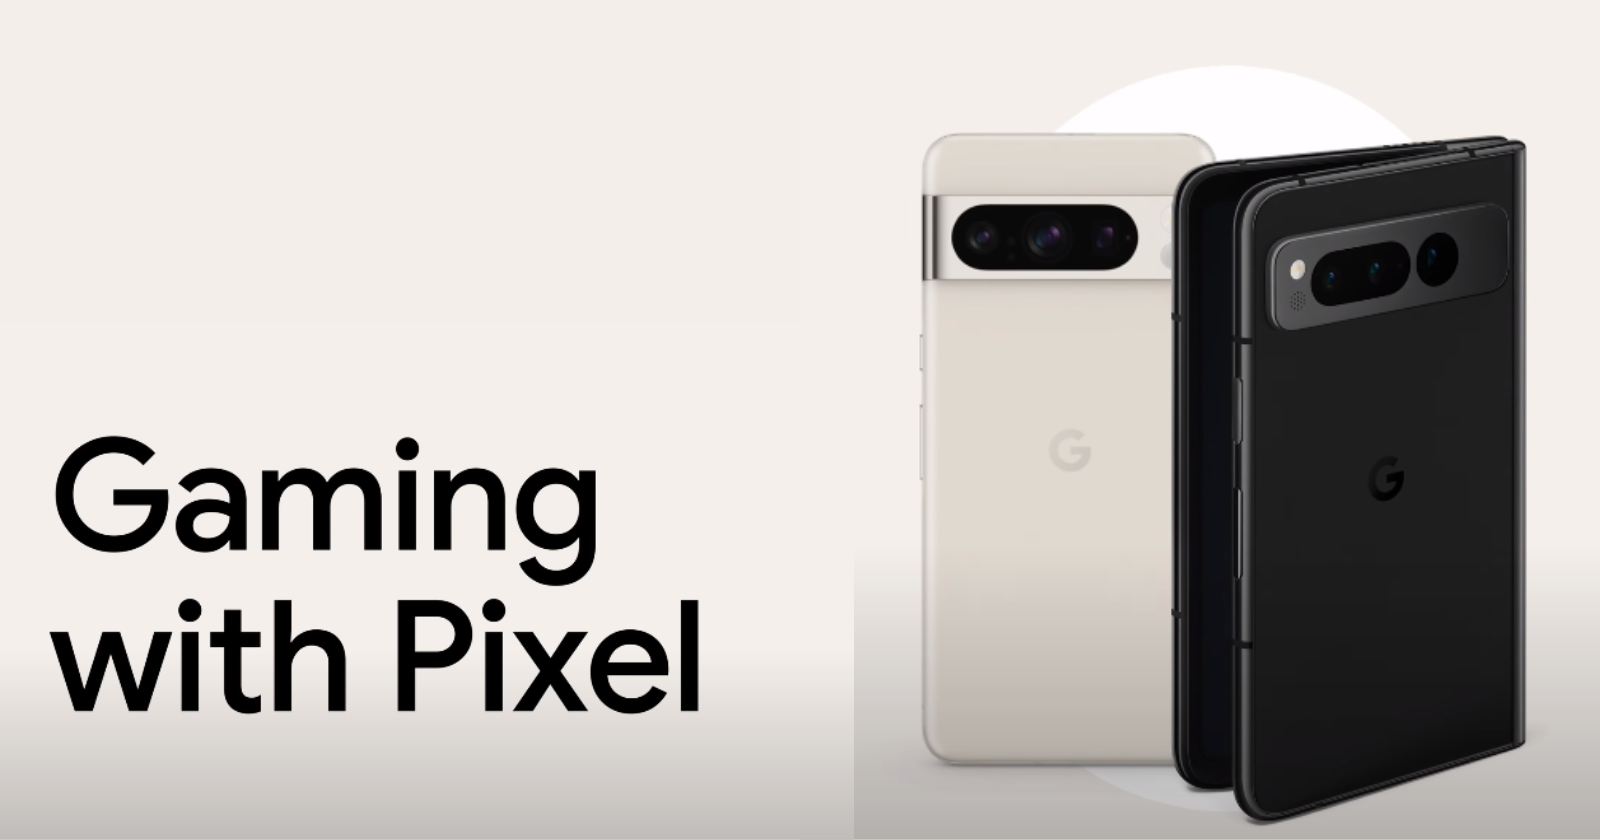 Google talks about gaming on Pixel in recent training video for UK Sales Managers and Retail Sales Associates